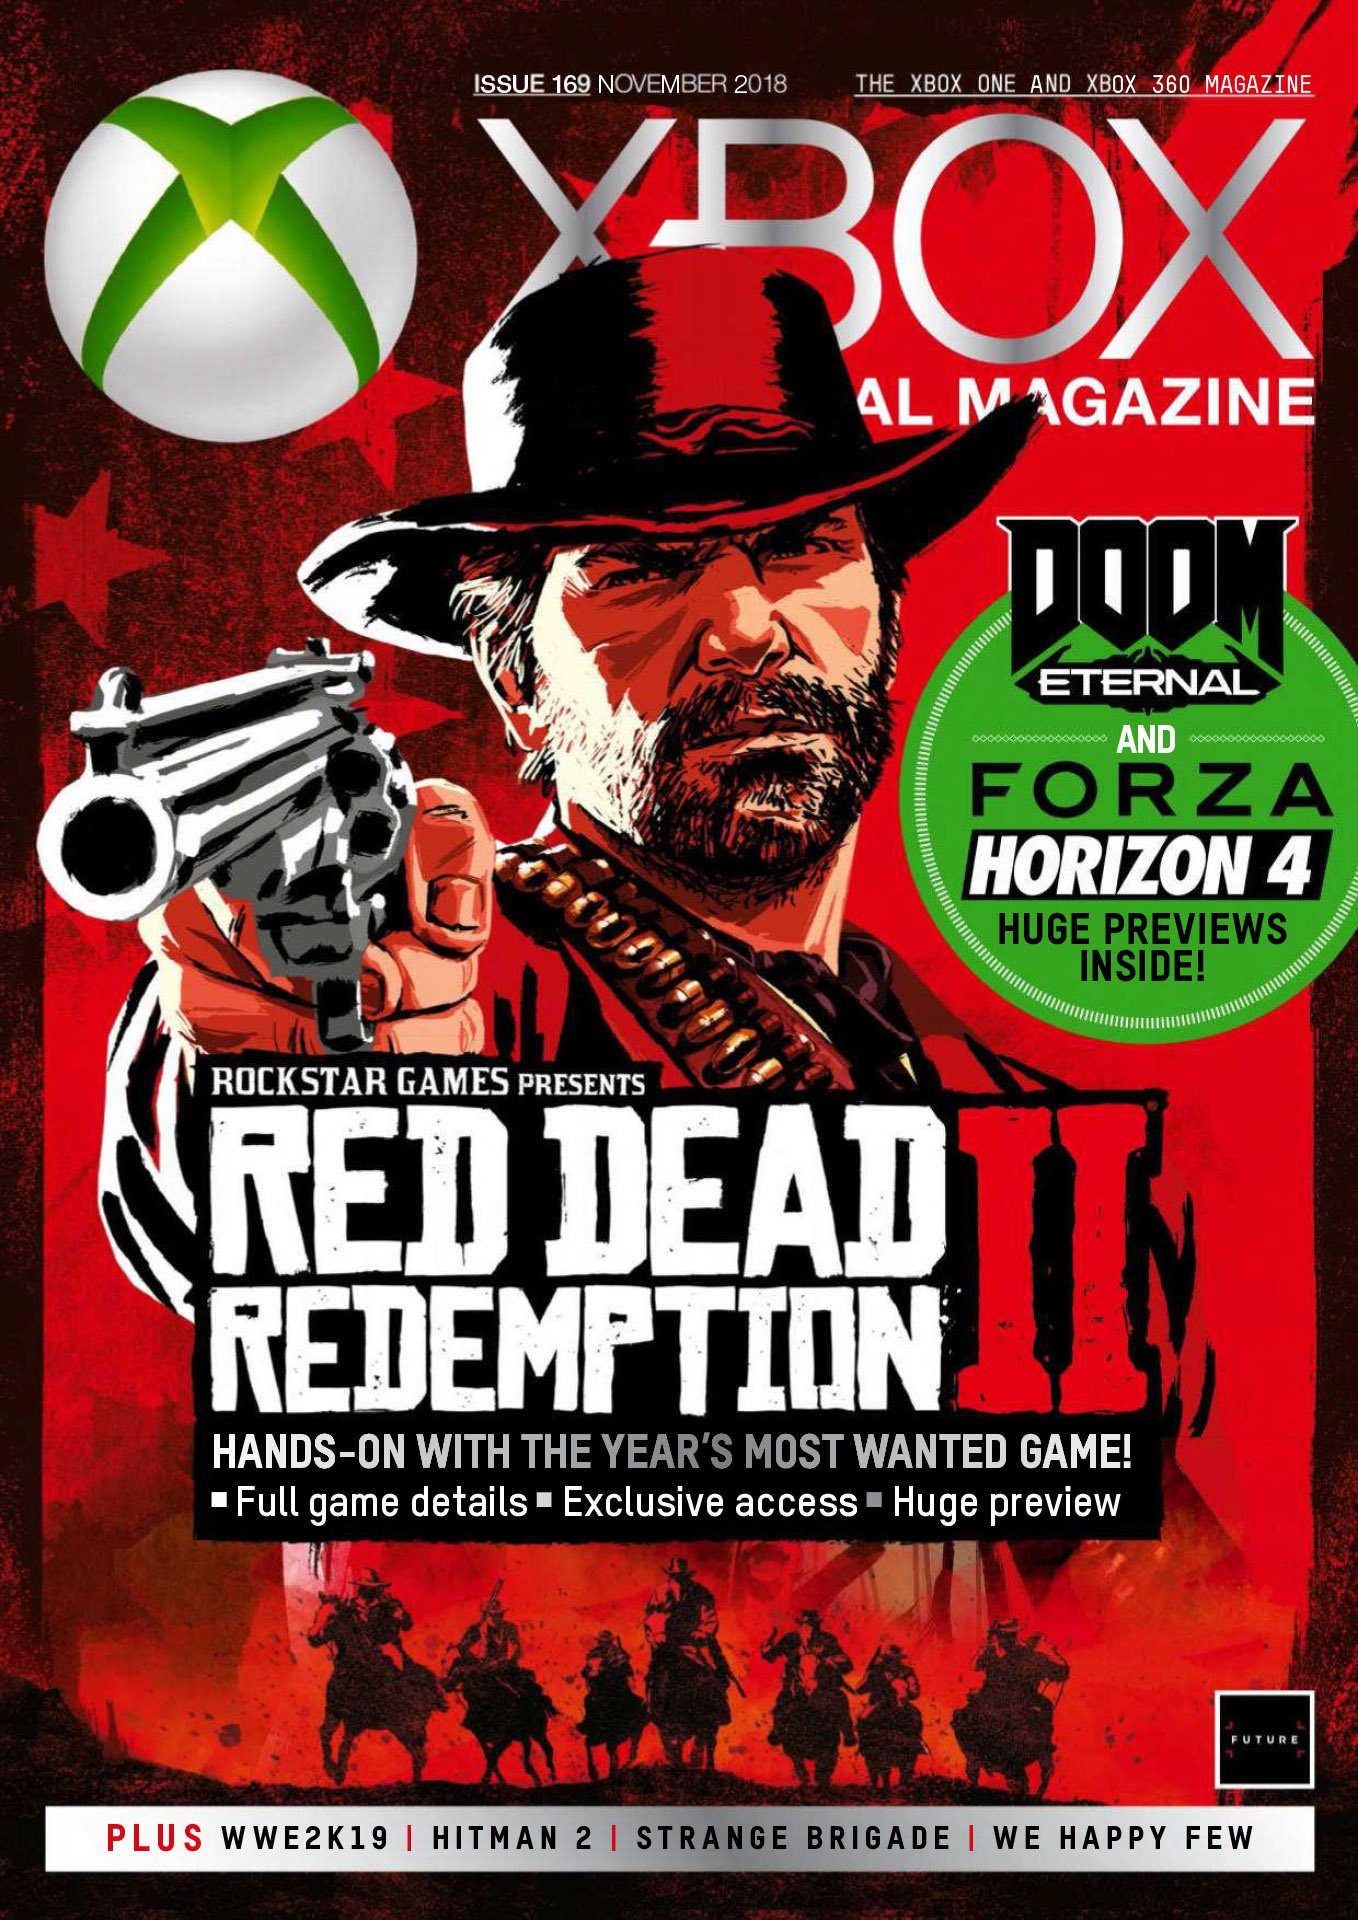 XBOX The Official Magazine Issue 169 (November 2018)